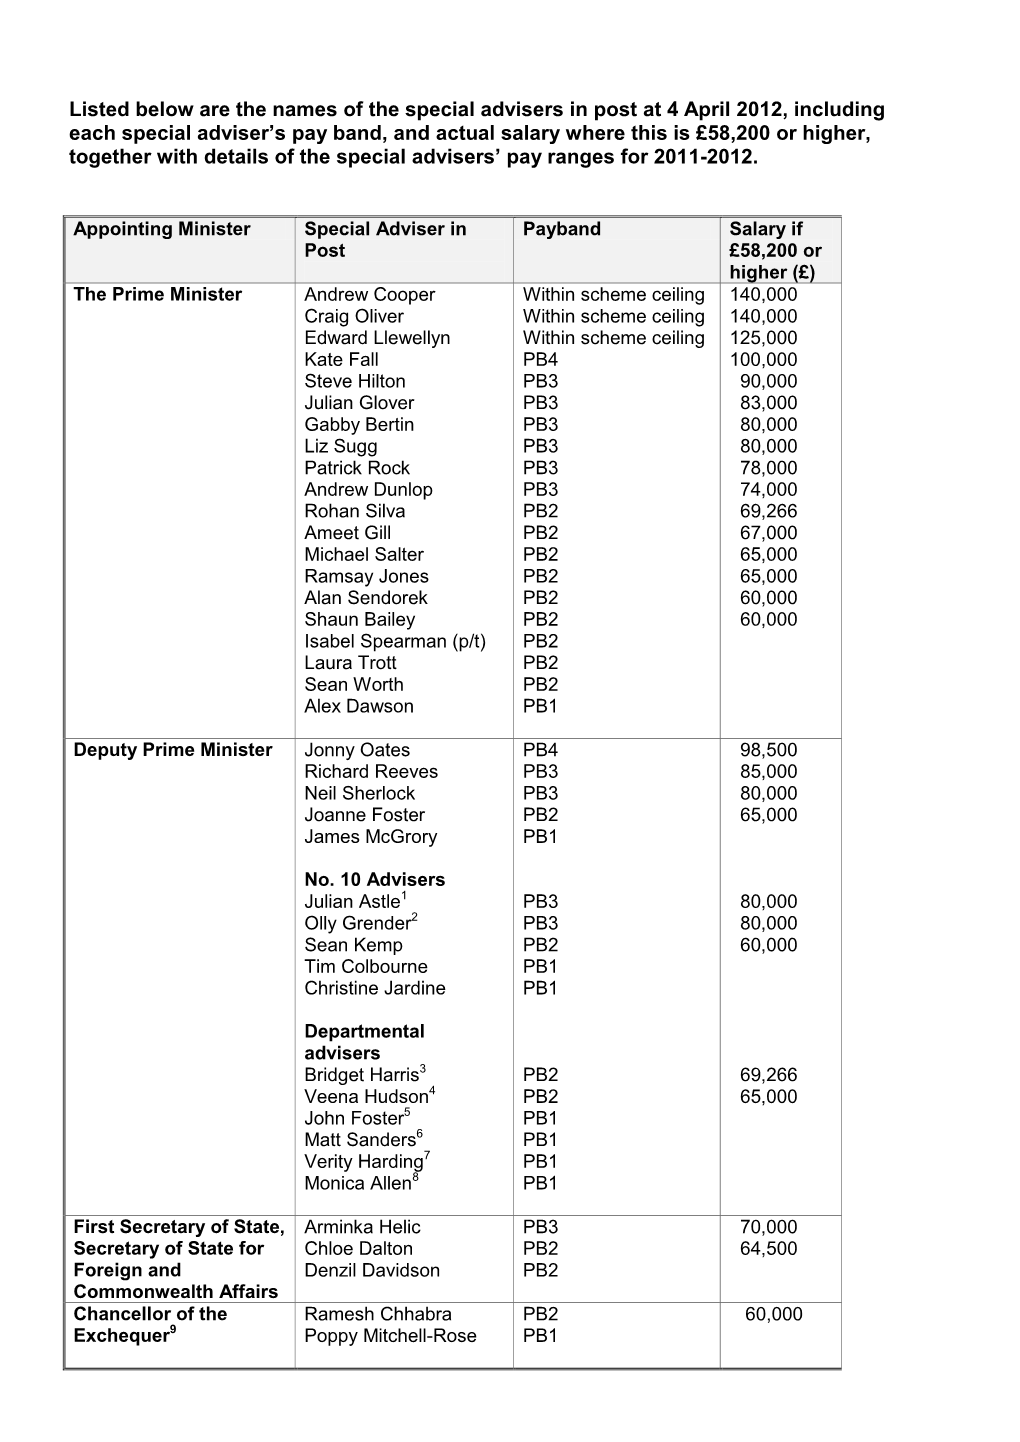 Listed Below Are the Names of the Special Advisers in Post at 4 April 2012, Including Each Special Adviser's Pay Band, And